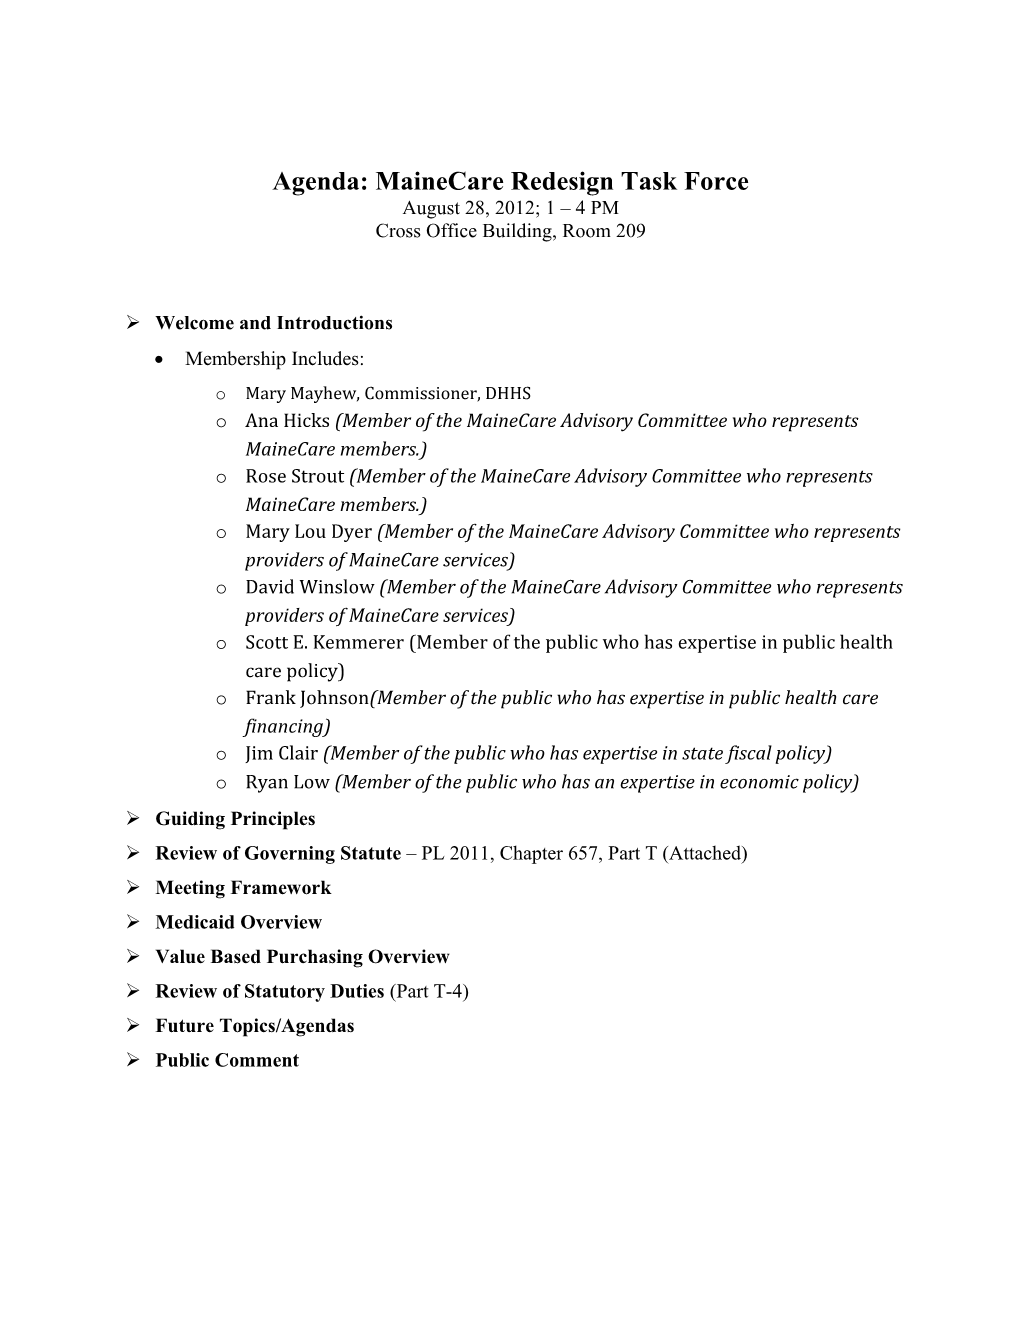 Agenda: Mainecare Redesign Task Force